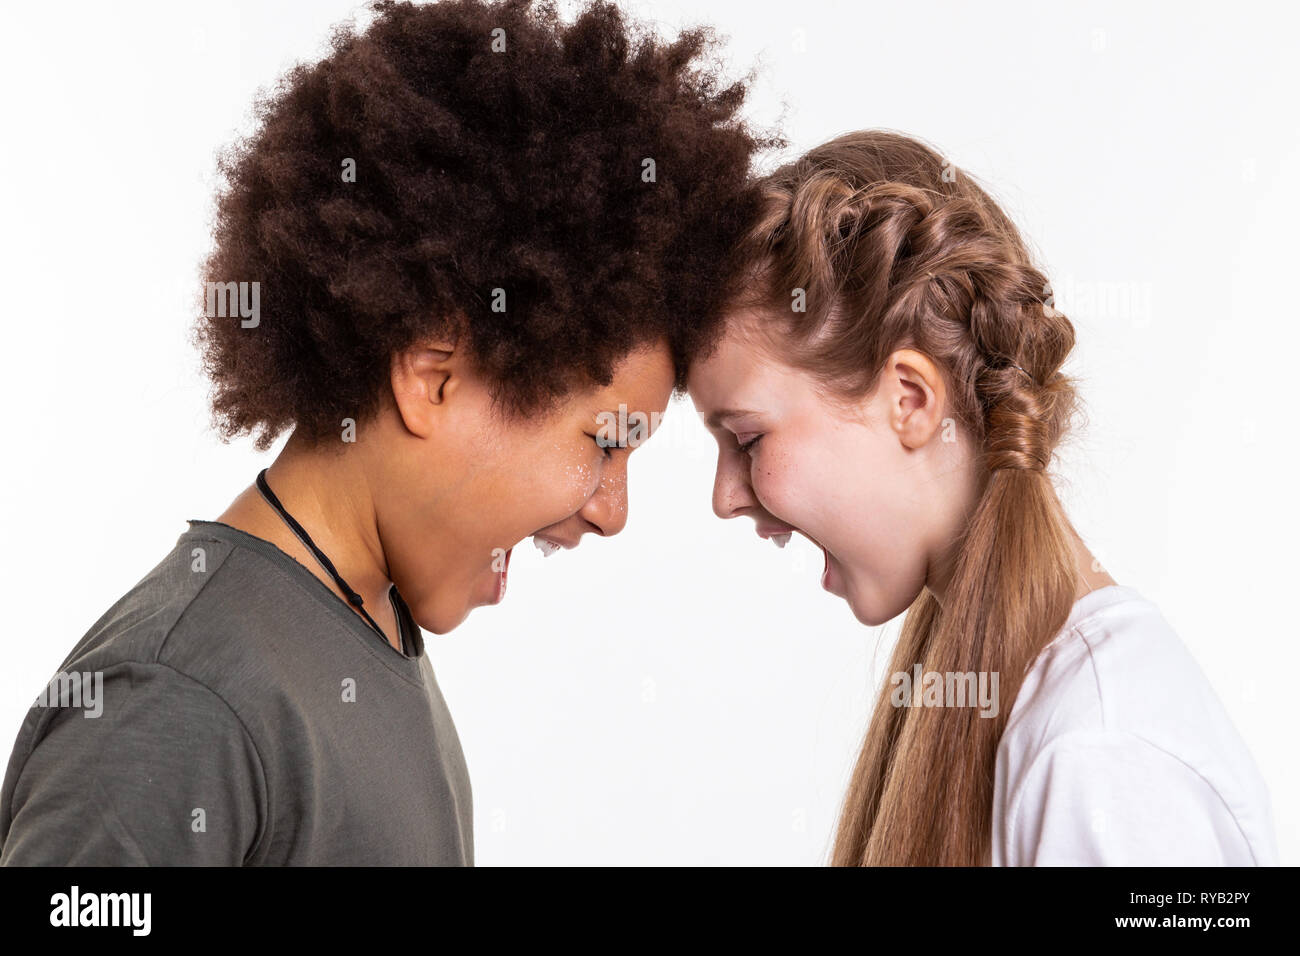 Aggressive good-looking children releasing emotions on each other Stock Photo